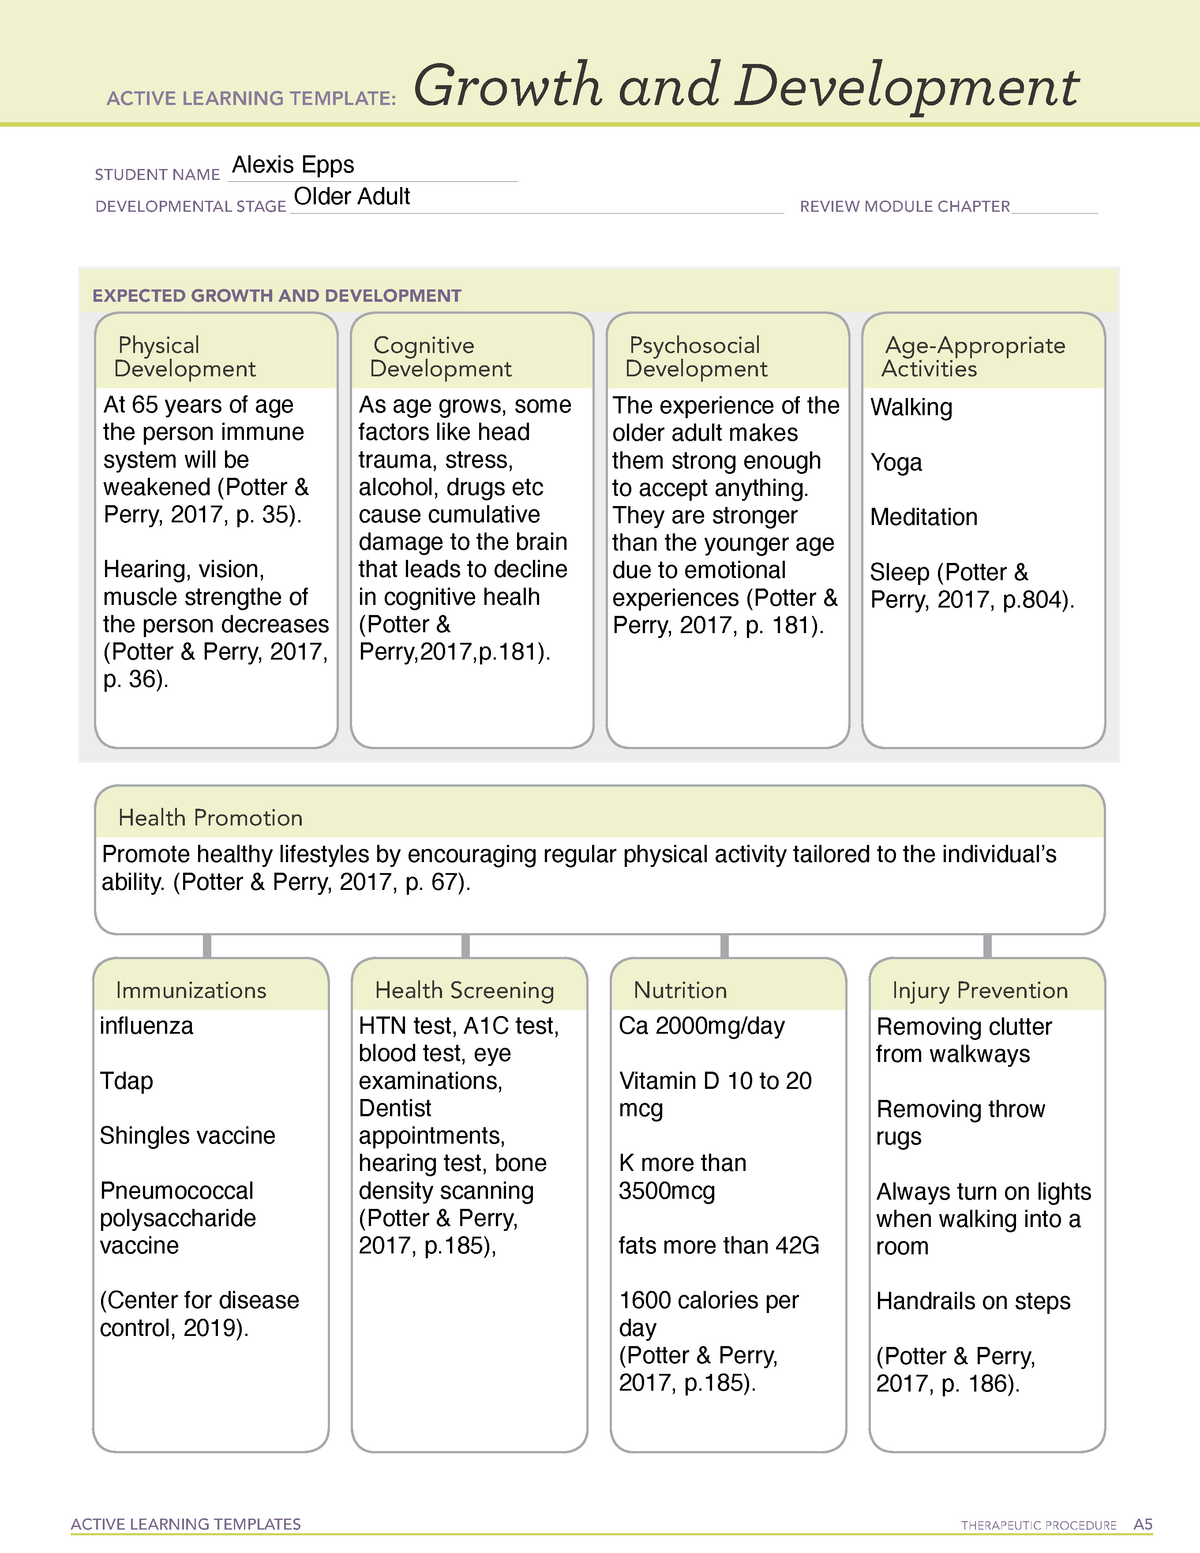 active-learning-template-gand-d-form-2-4-active-learning-templates-therapeutic-procedure-a